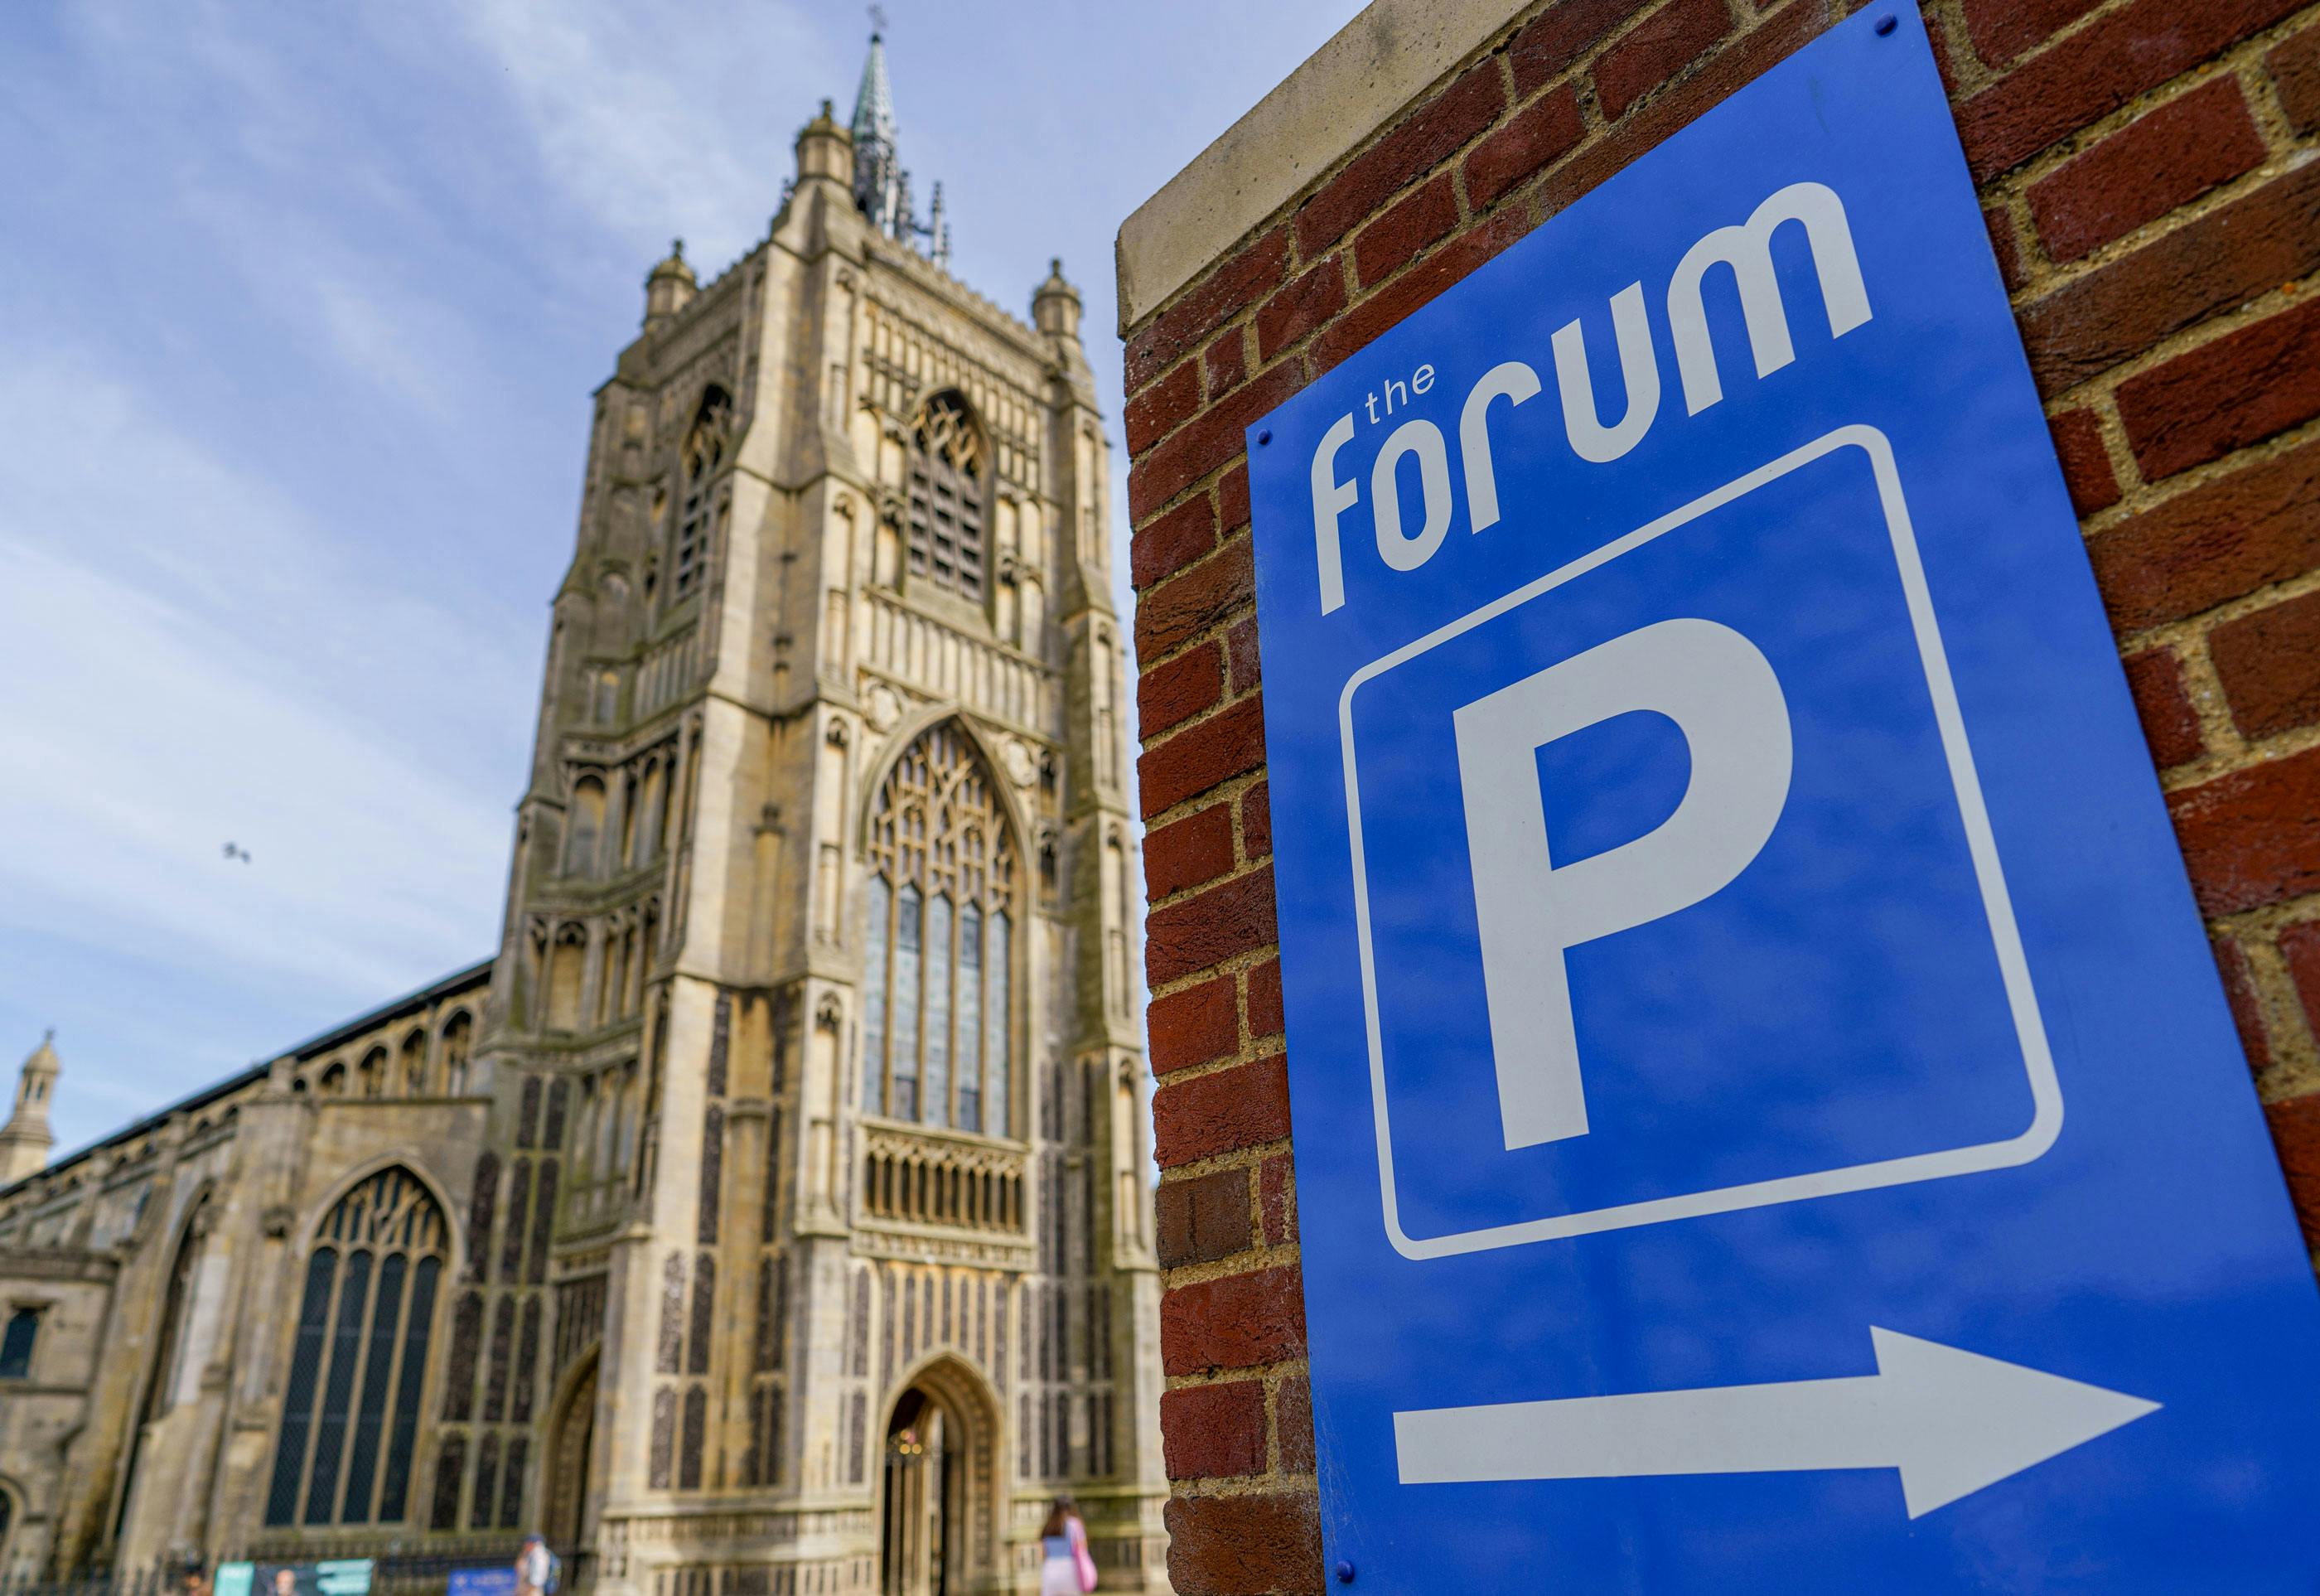 A blue sign with The Forum, a parking symbol and an arrow pointing to the right with St Peter Mancroft church in the distance.